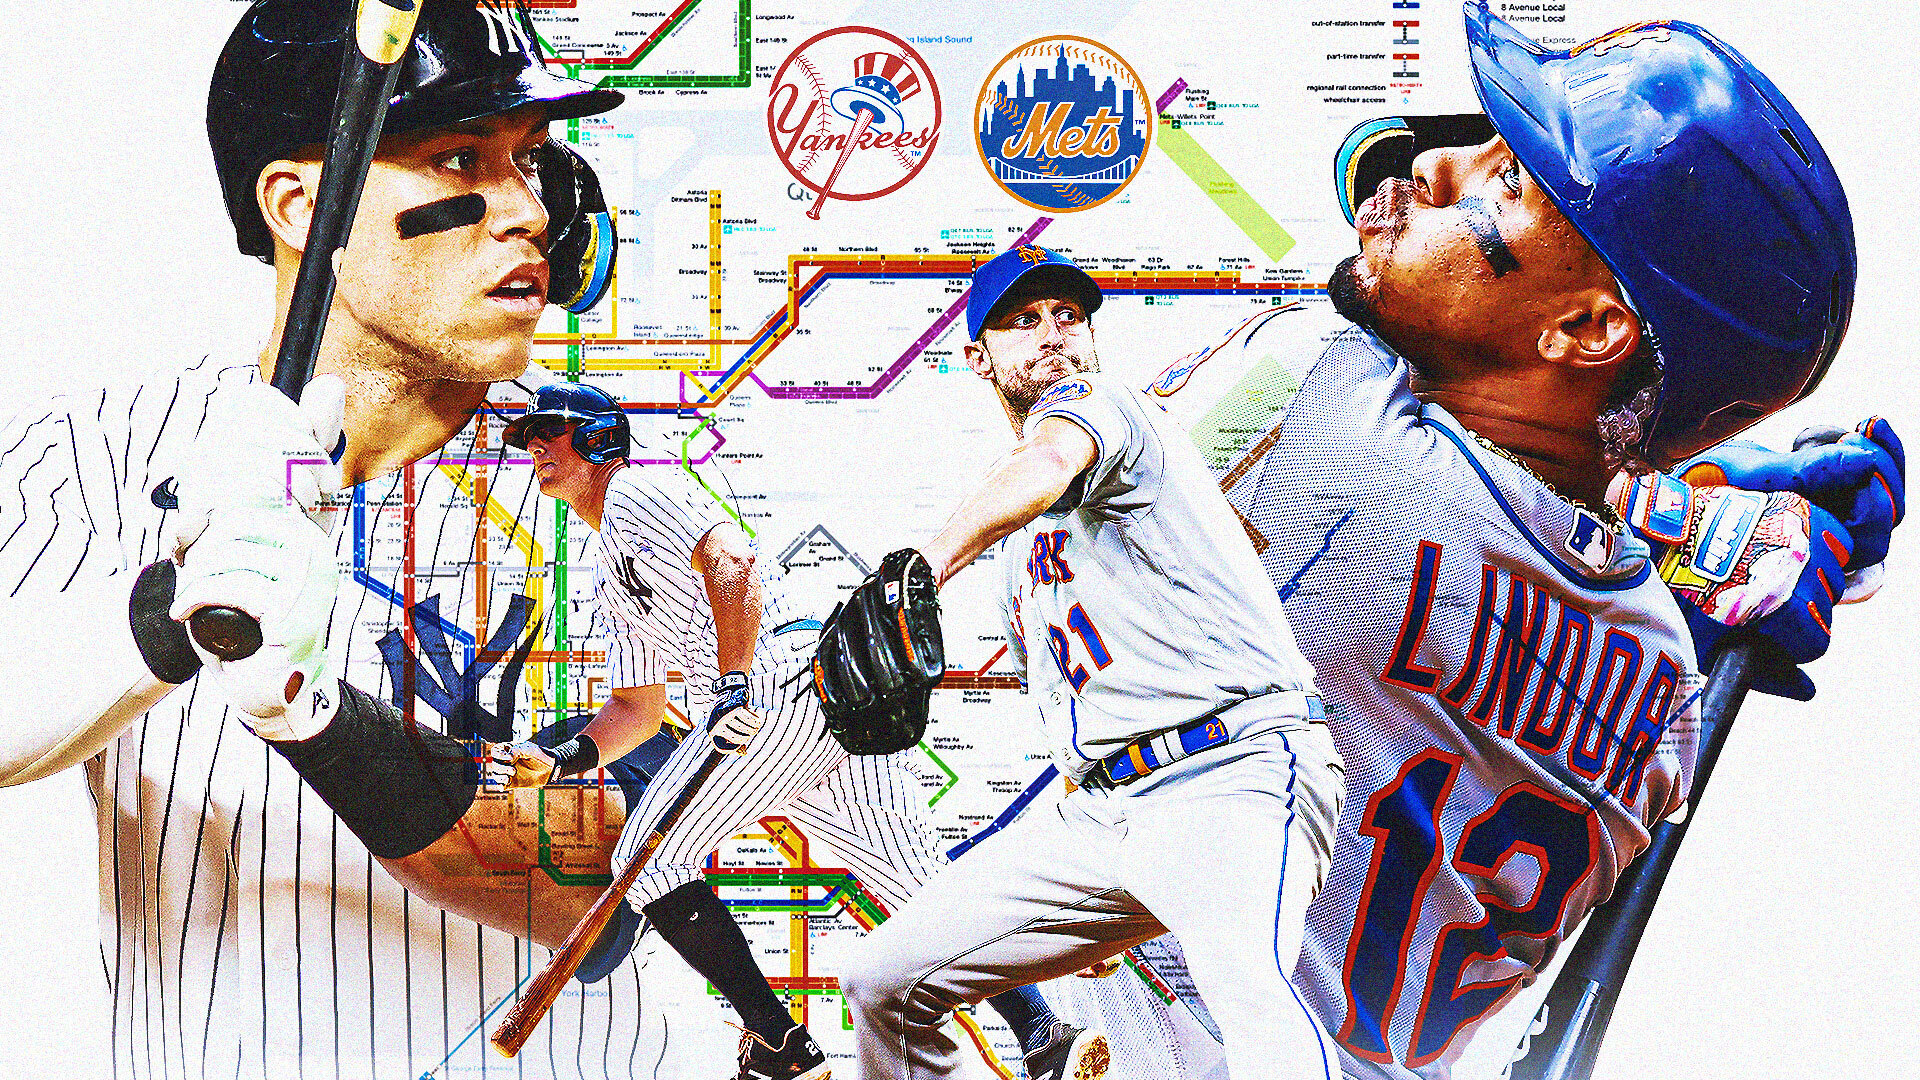 New York State Of Mind: Will The Yankees Or Mets Win A World Series?